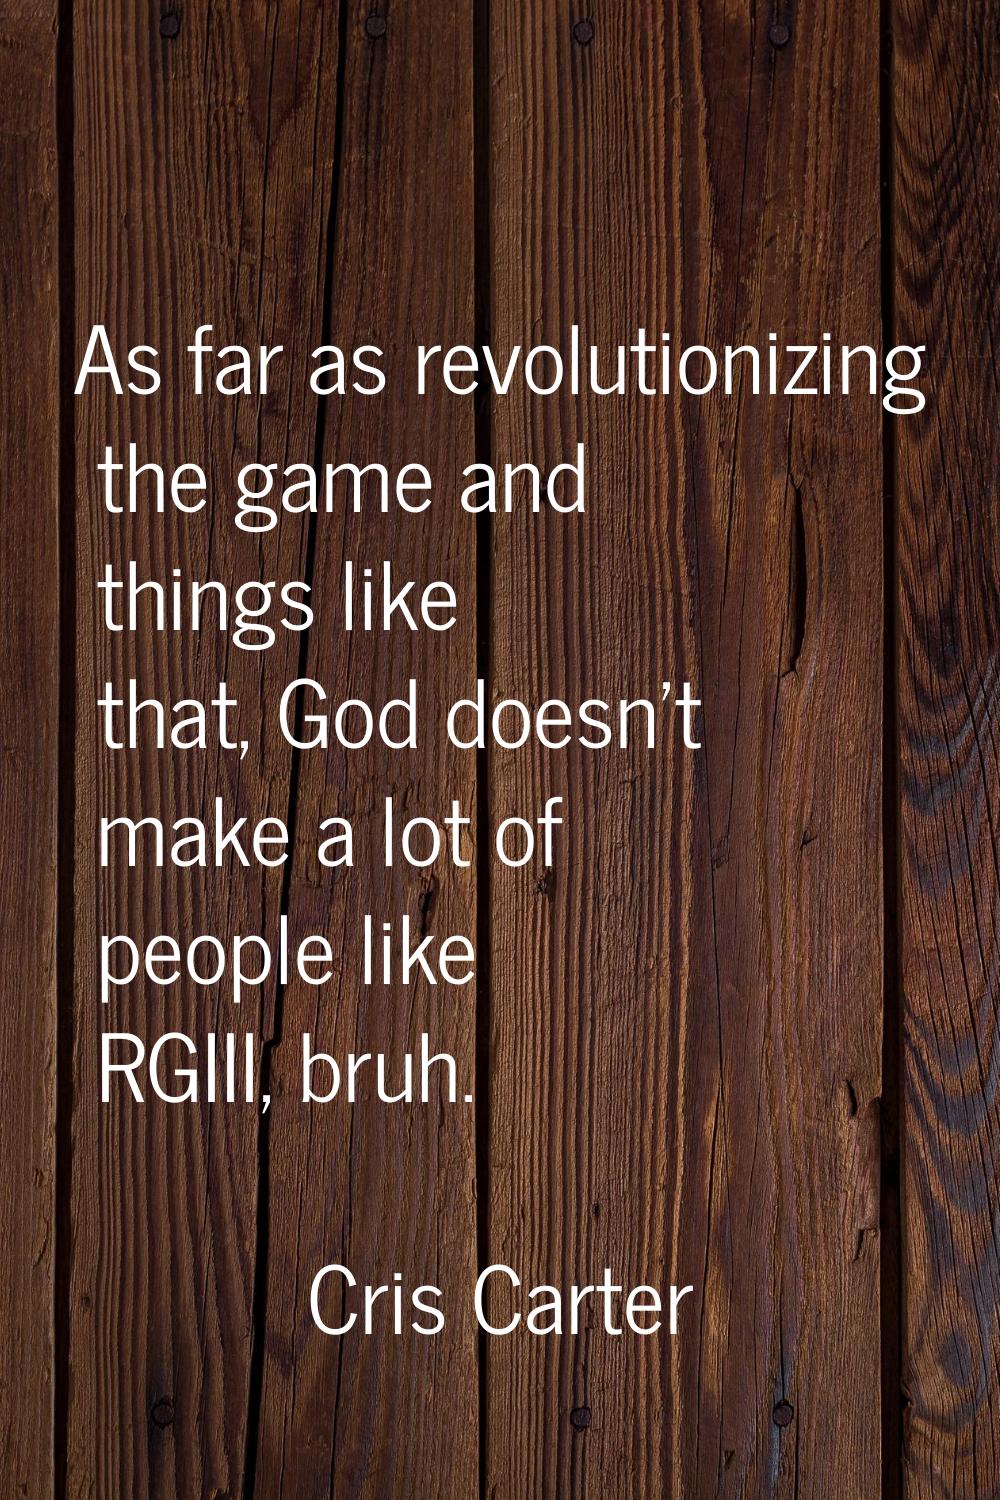 As far as revolutionizing the game and things like that, God doesn't make a lot of people like RGII